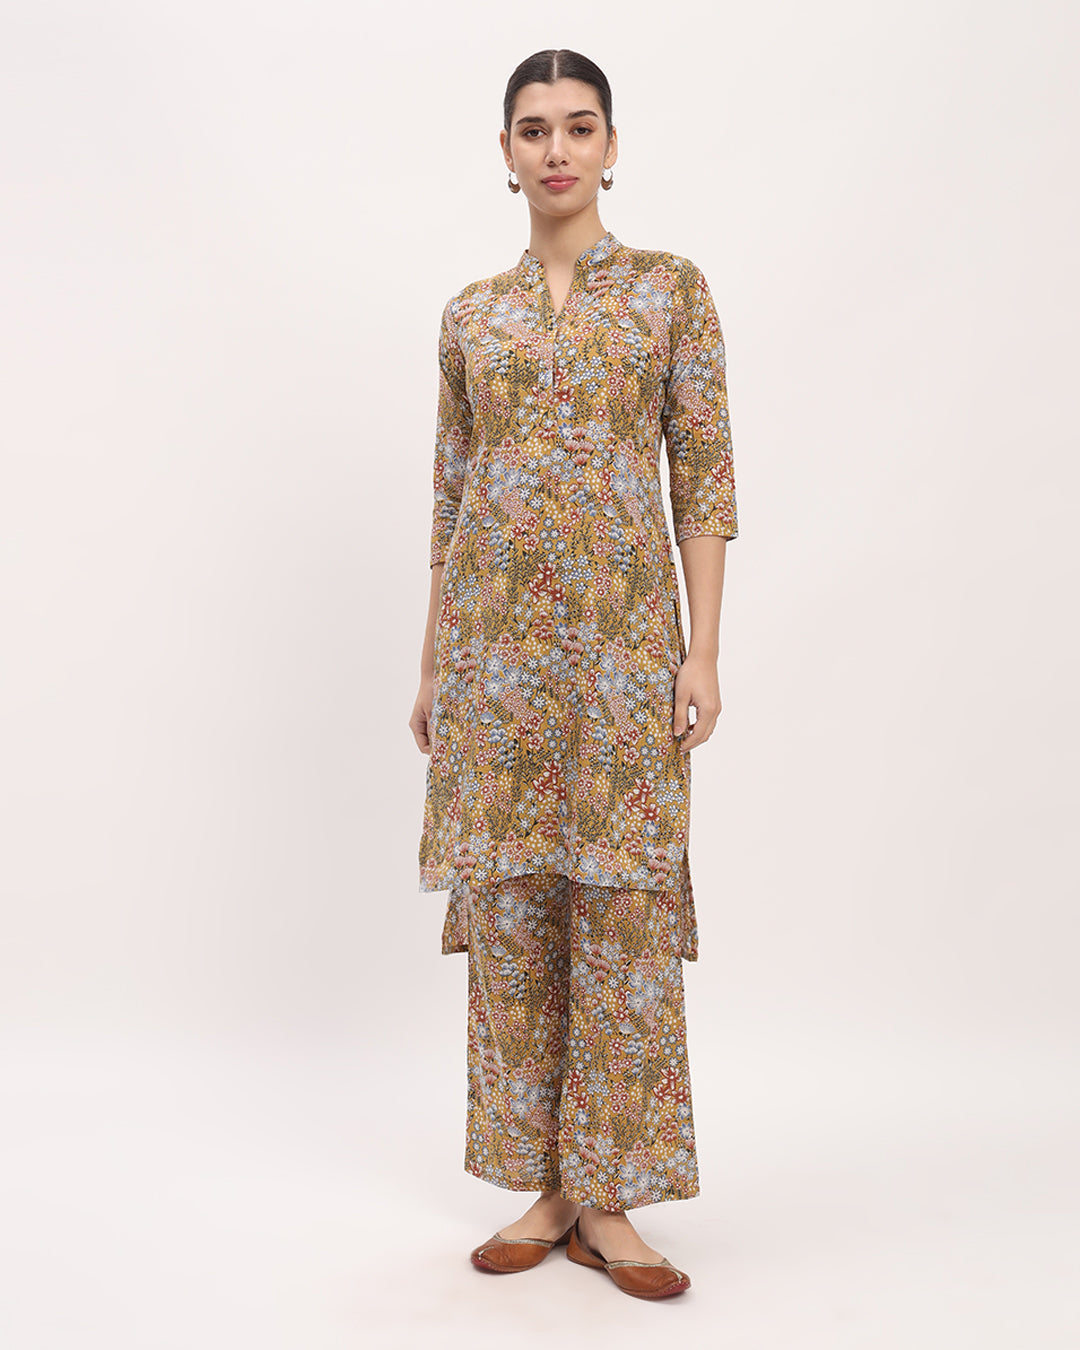 Combo: Golden Blossom & Ivory Quadrangle High-Low Printed Kurta (Without Bottoms)